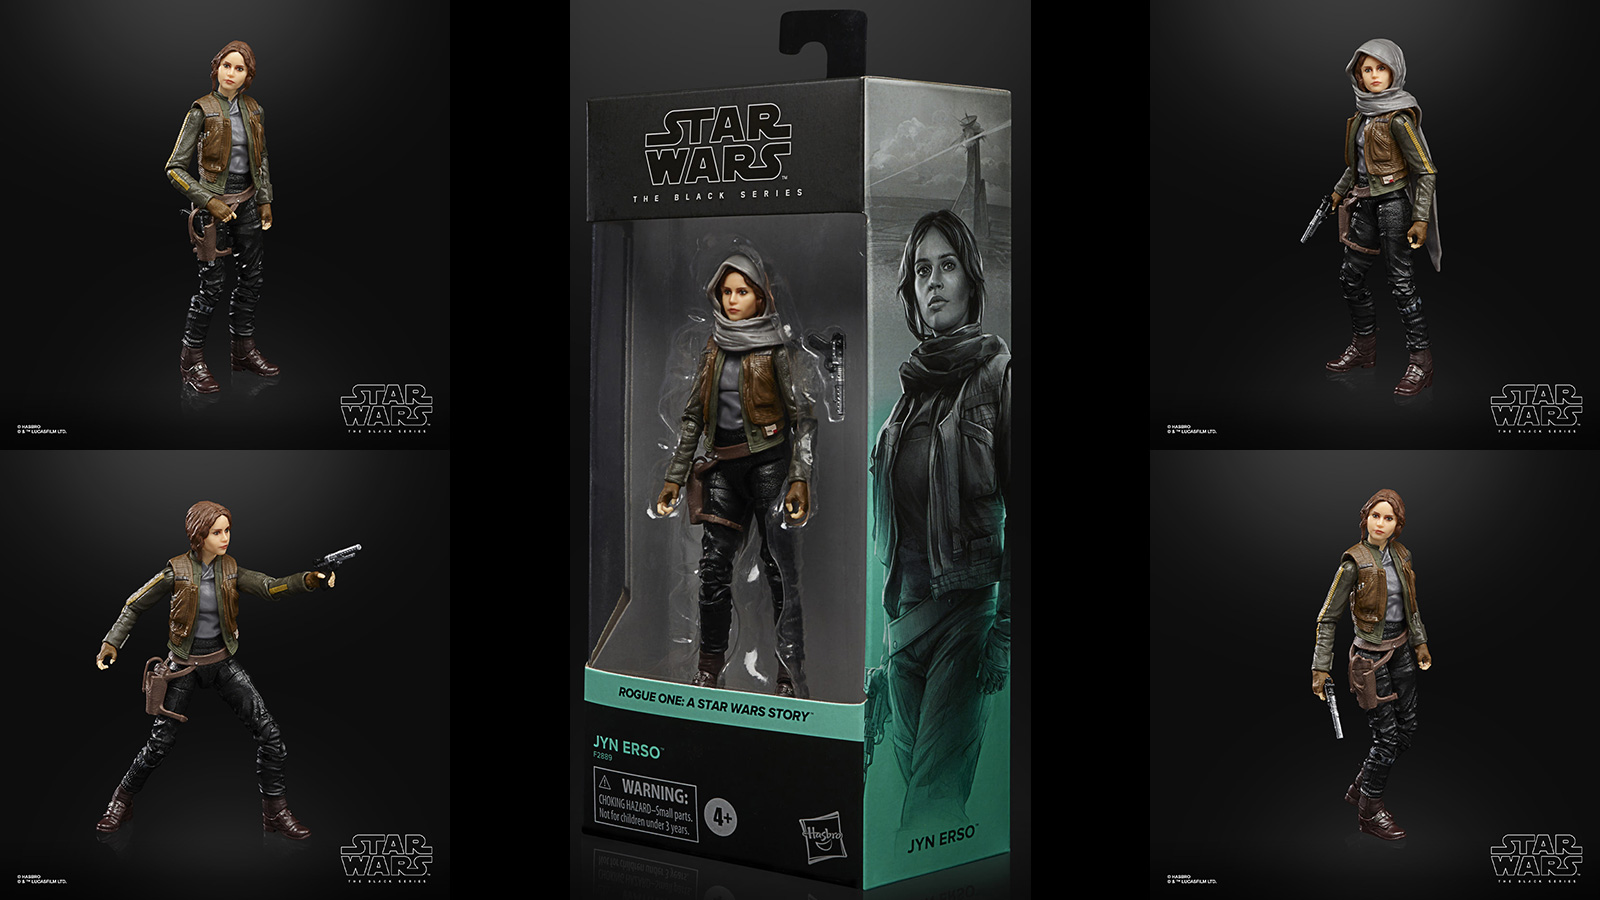 In Stock At GameStop.com - The Black Series 6-Inch Rogue One Jyn Erso Figure - Also Save 20% Off Star Wars Figures, Statues and Replicas